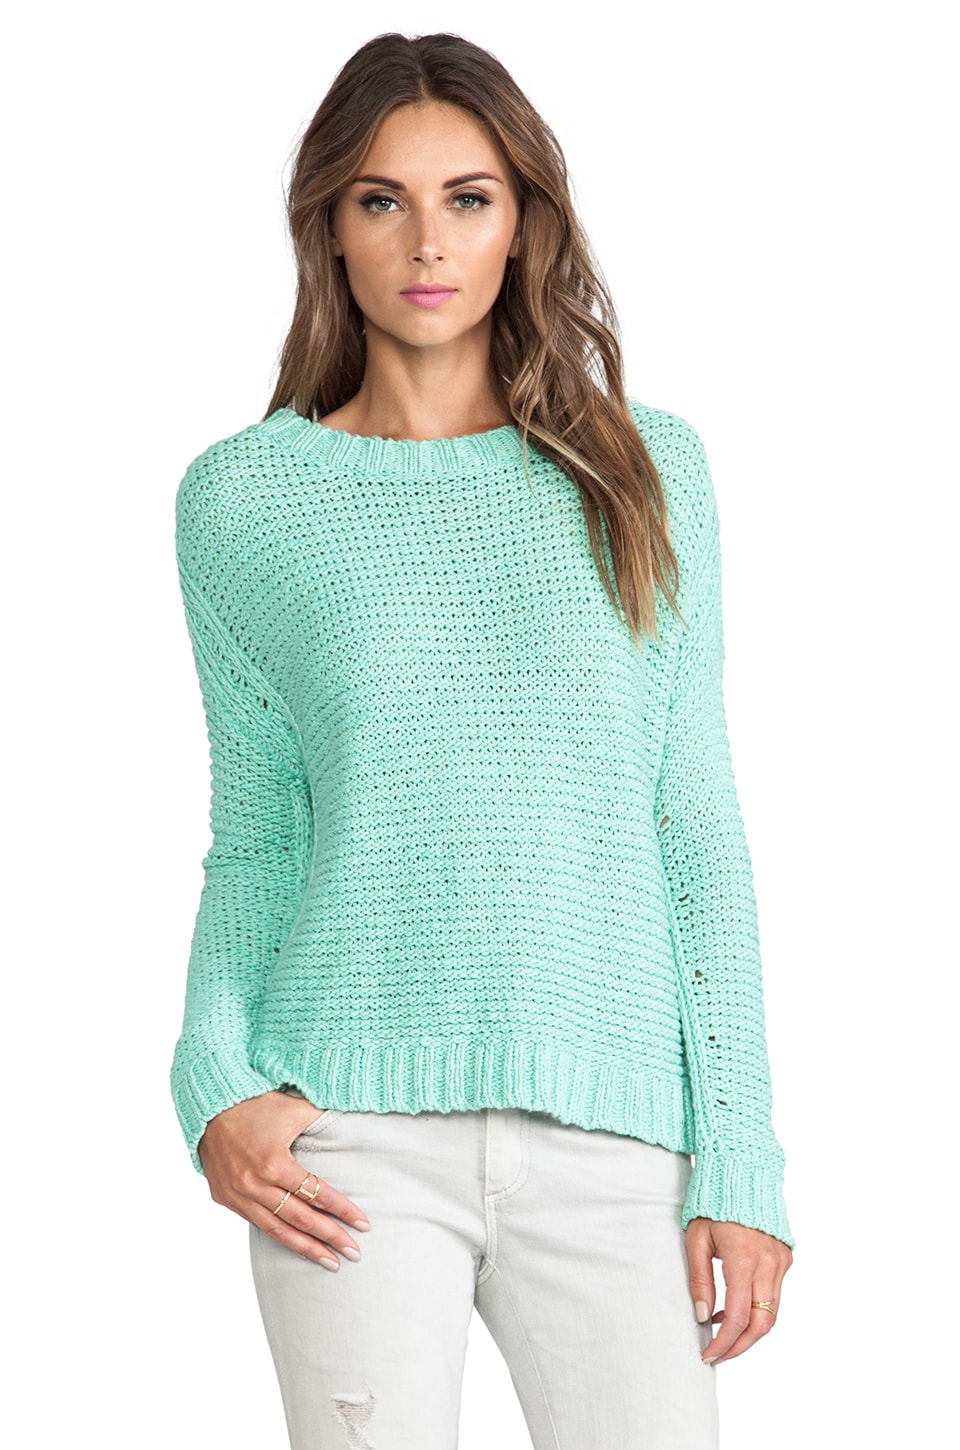 Elizabeth and James Boxy Pullover Sweater in Mint | REVOLVE